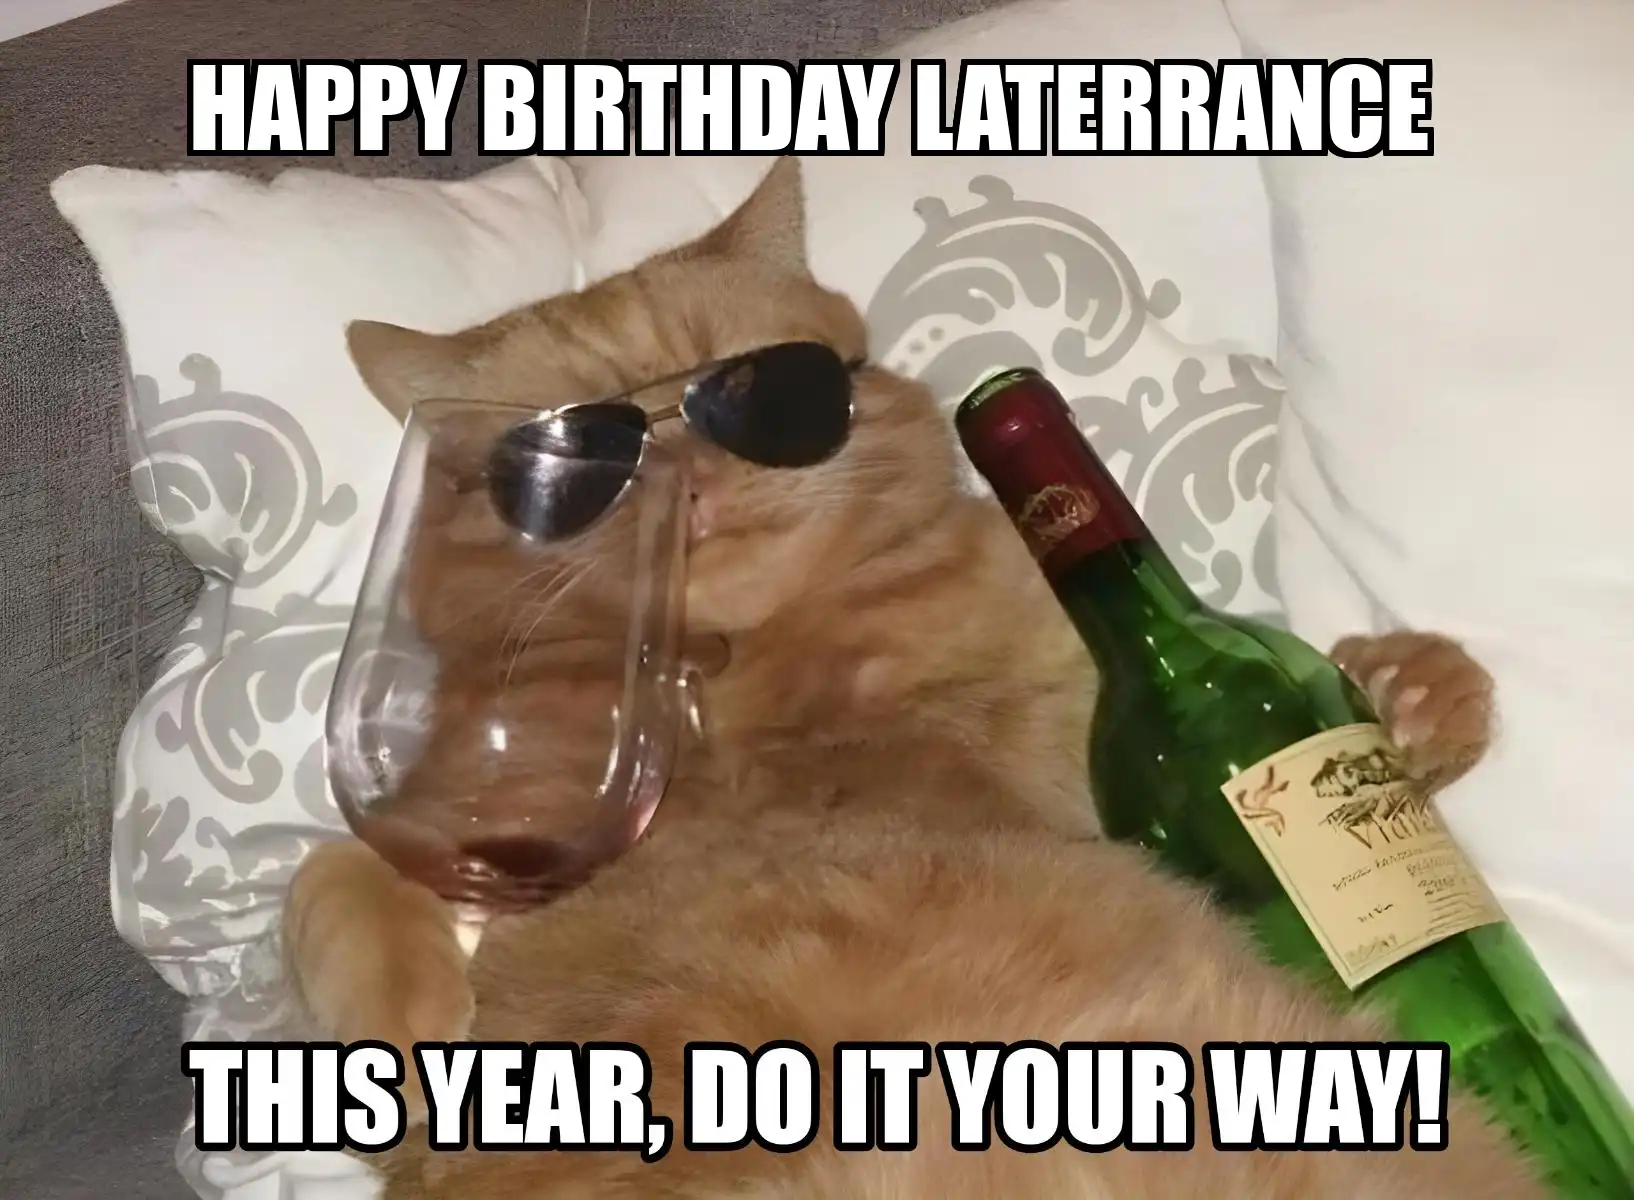 Happy Birthday Laterrance This Year Do It Your Way Meme